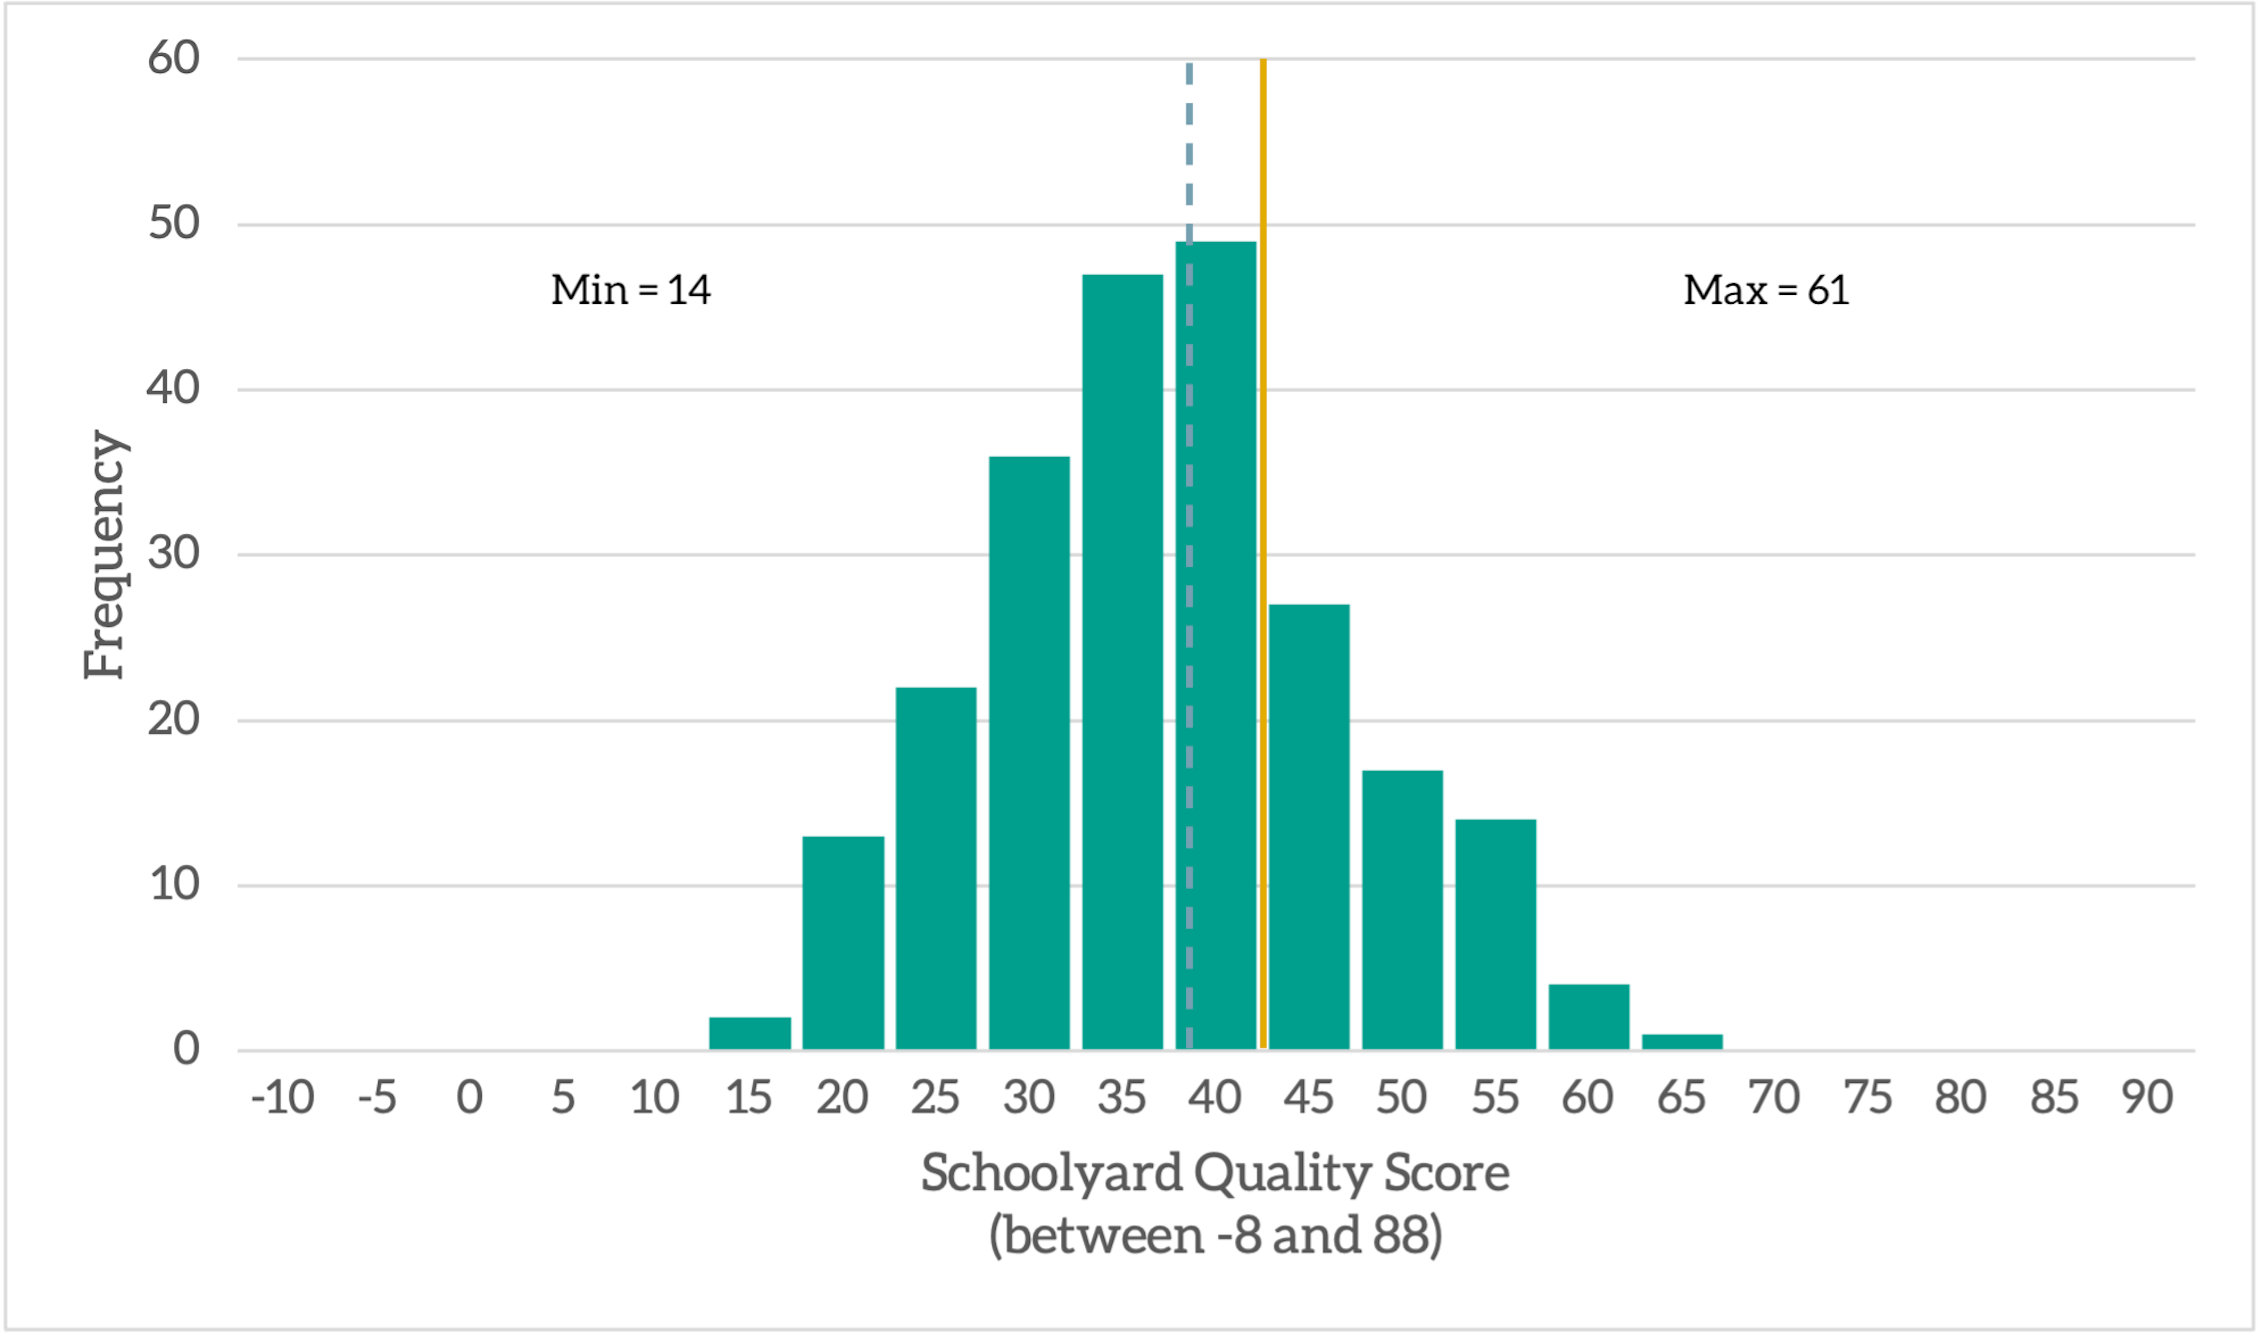 Histogram showing the distirbution of Schoolyard Quality Scores across our sample with bar graphs